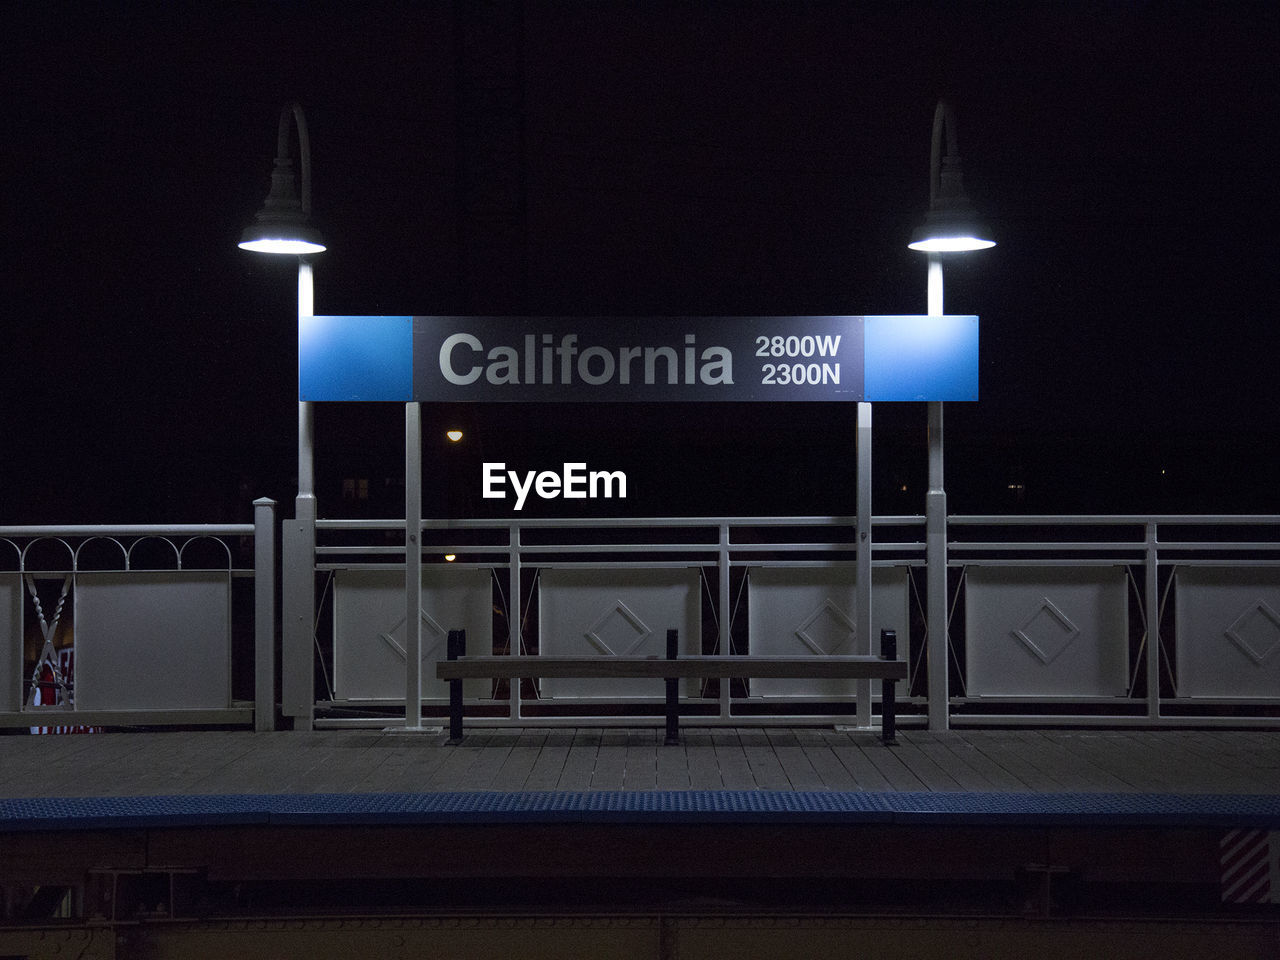 Text on structure and lighting equipment at railroad station platform